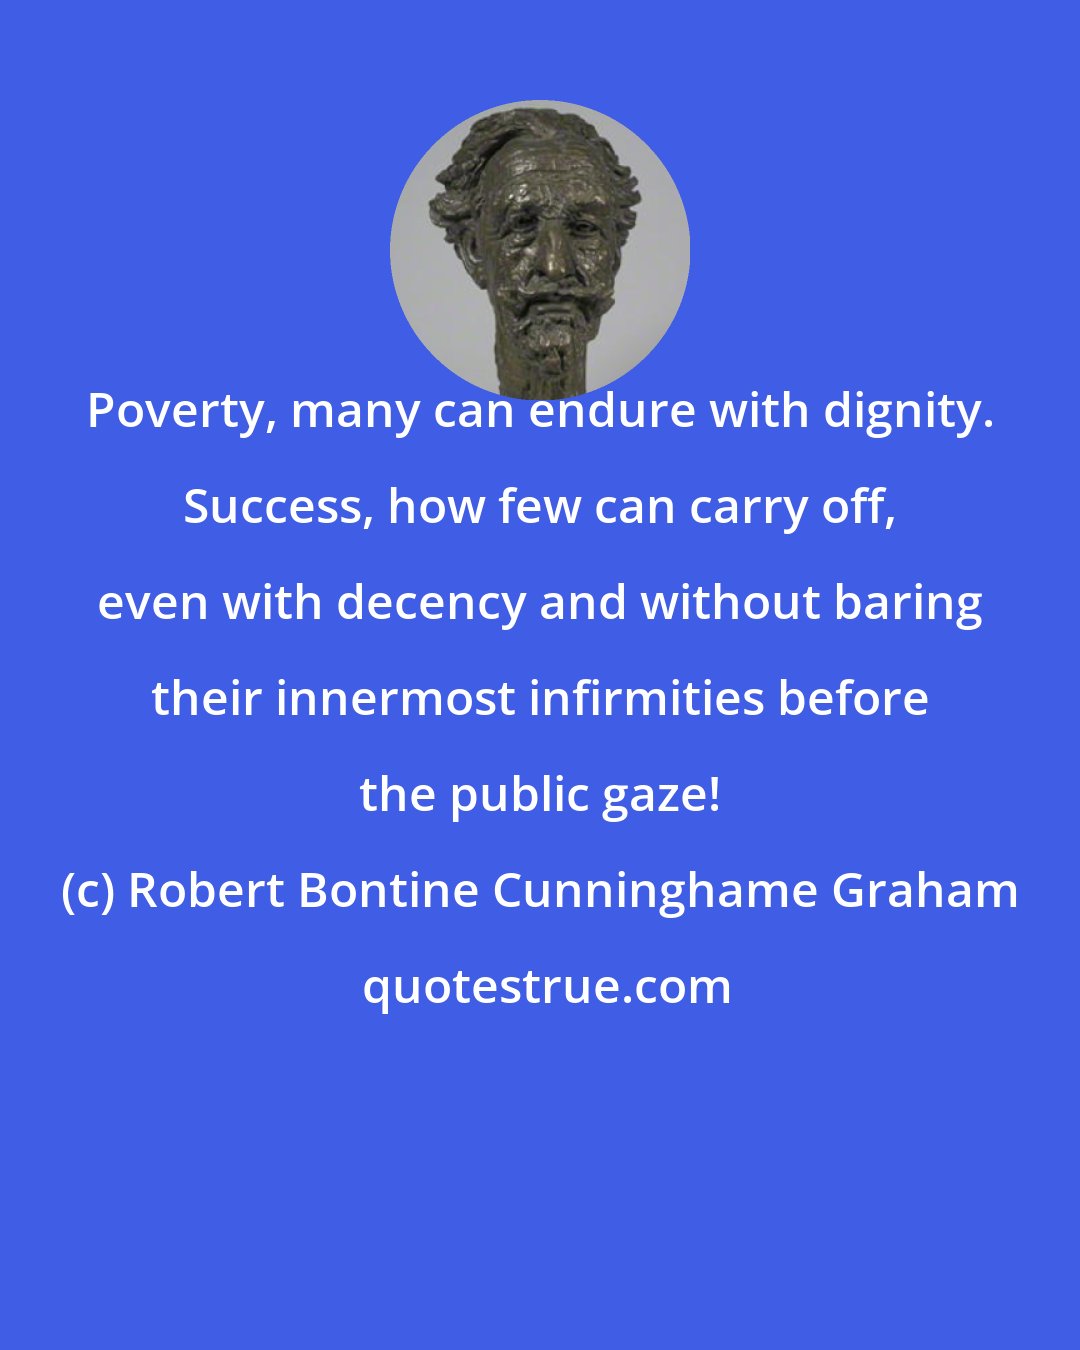 Robert Bontine Cunninghame Graham: Poverty, many can endure with dignity. Success, how few can carry off, even with decency and without baring their innermost infirmities before the public gaze!